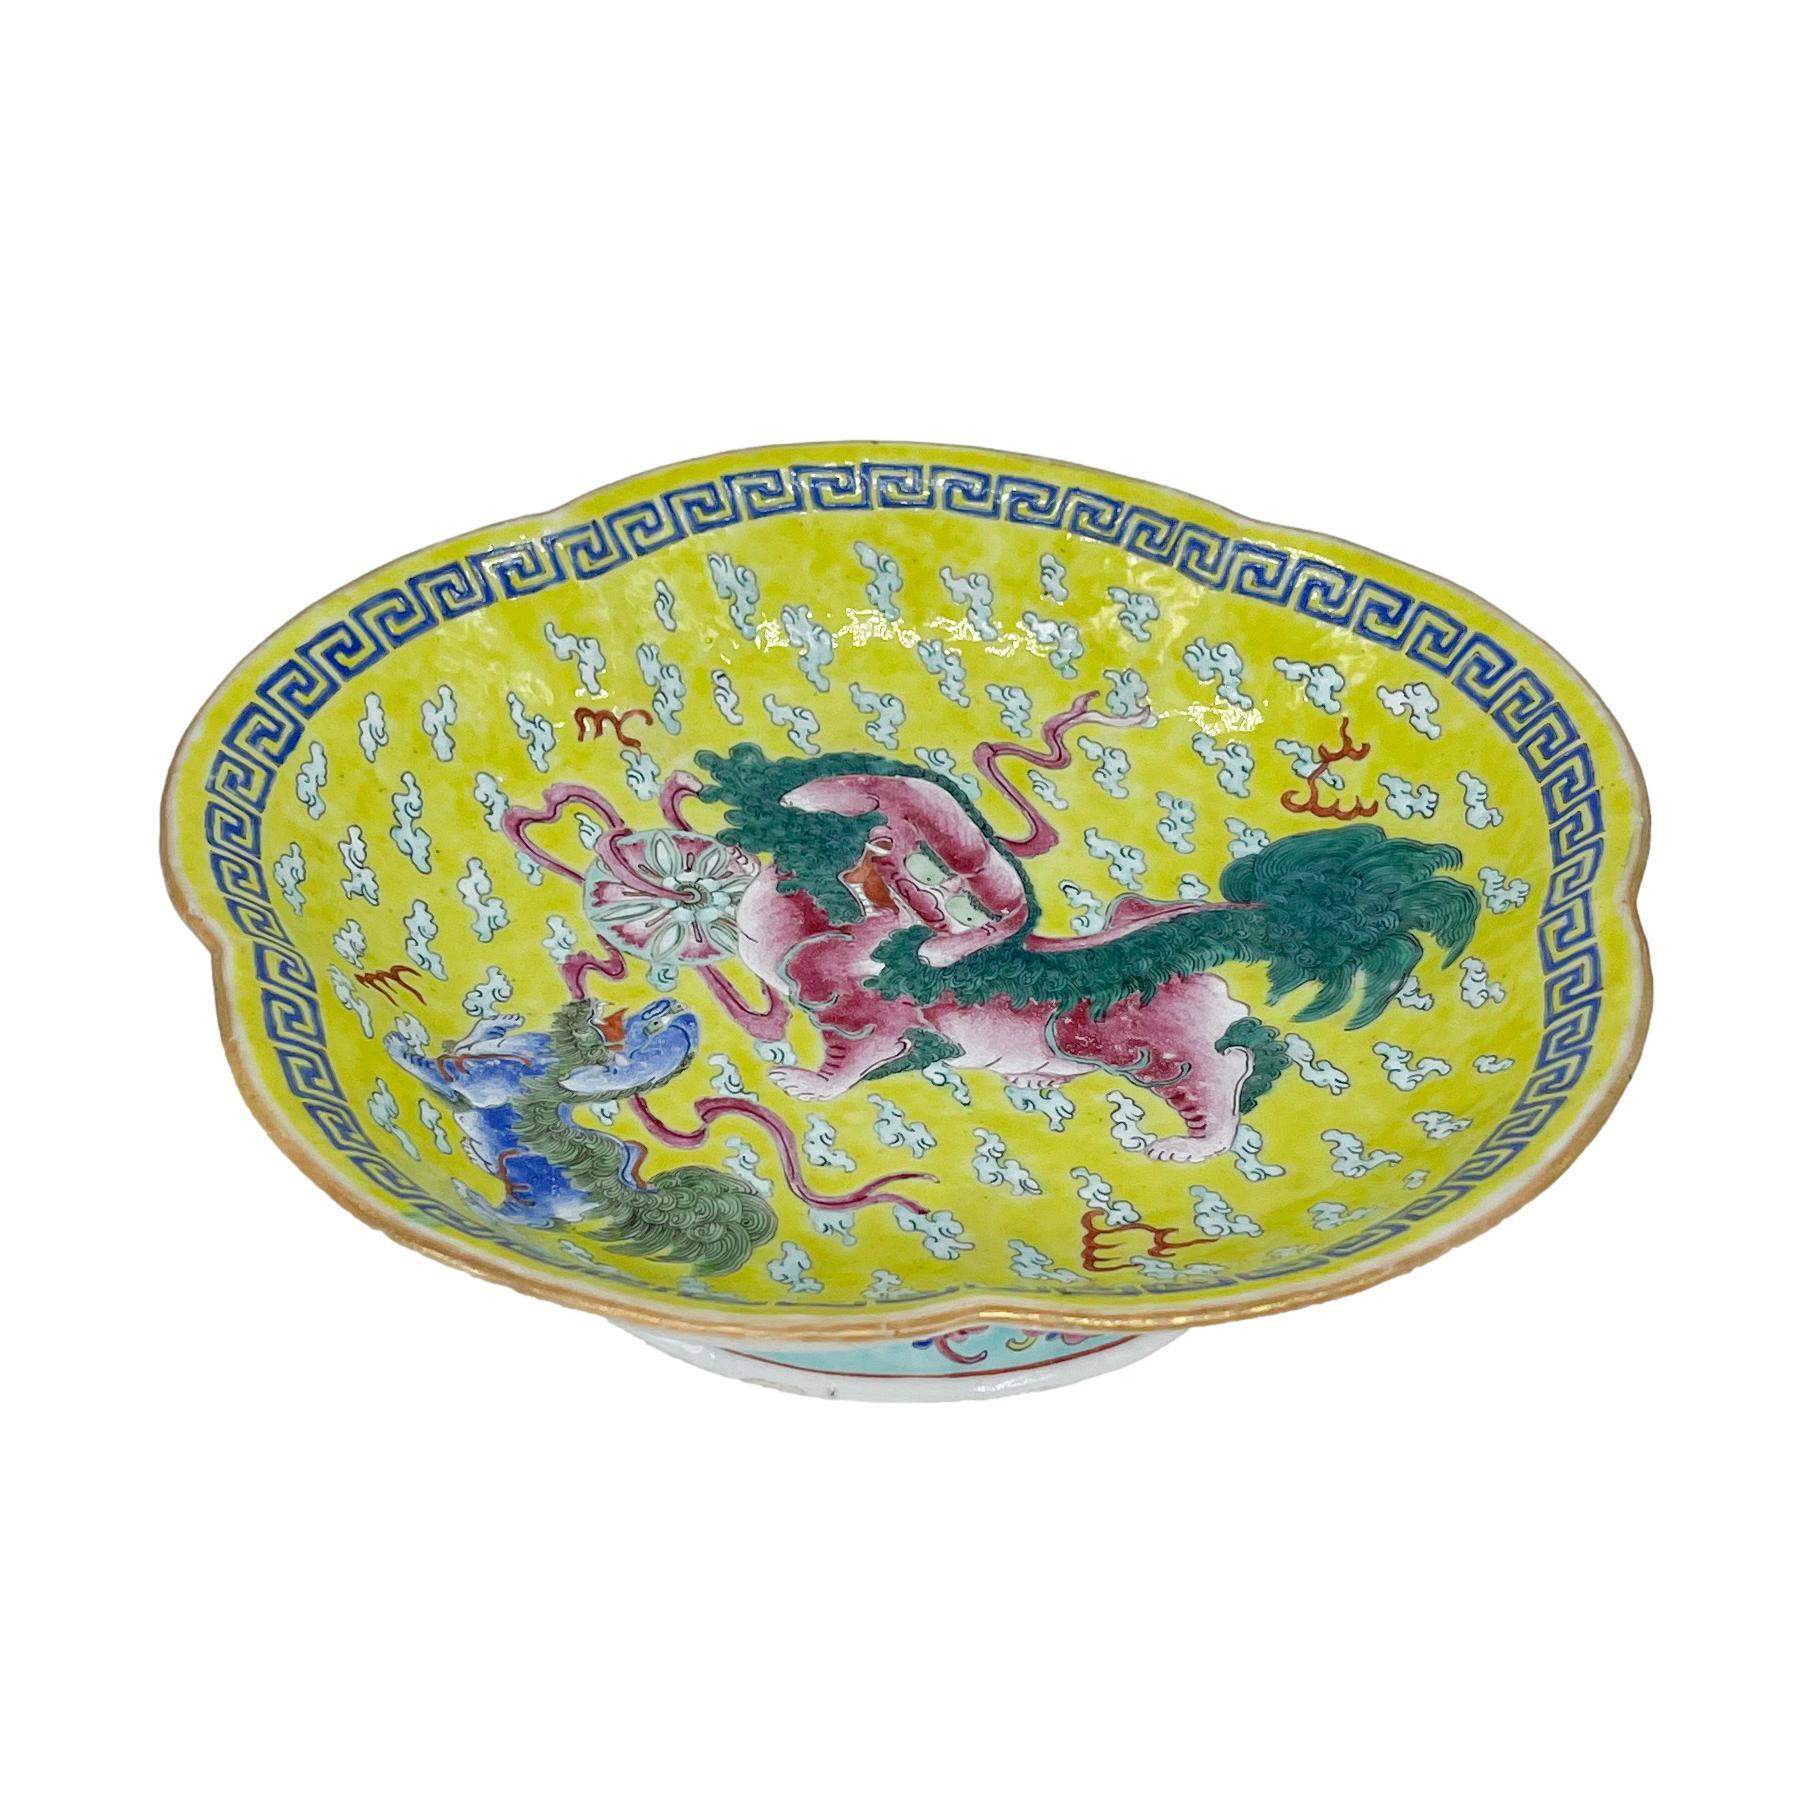 Chinese Export Porcelain Famille Jeune (Yellow-Ground) Footed Dish, Qing Dynasty, Tongzhi Era (1862-1874). The five-lobed dish decorated with a male foo lion glazed in rose among a swath of green-glazed jungle foliage, his paw resting on a